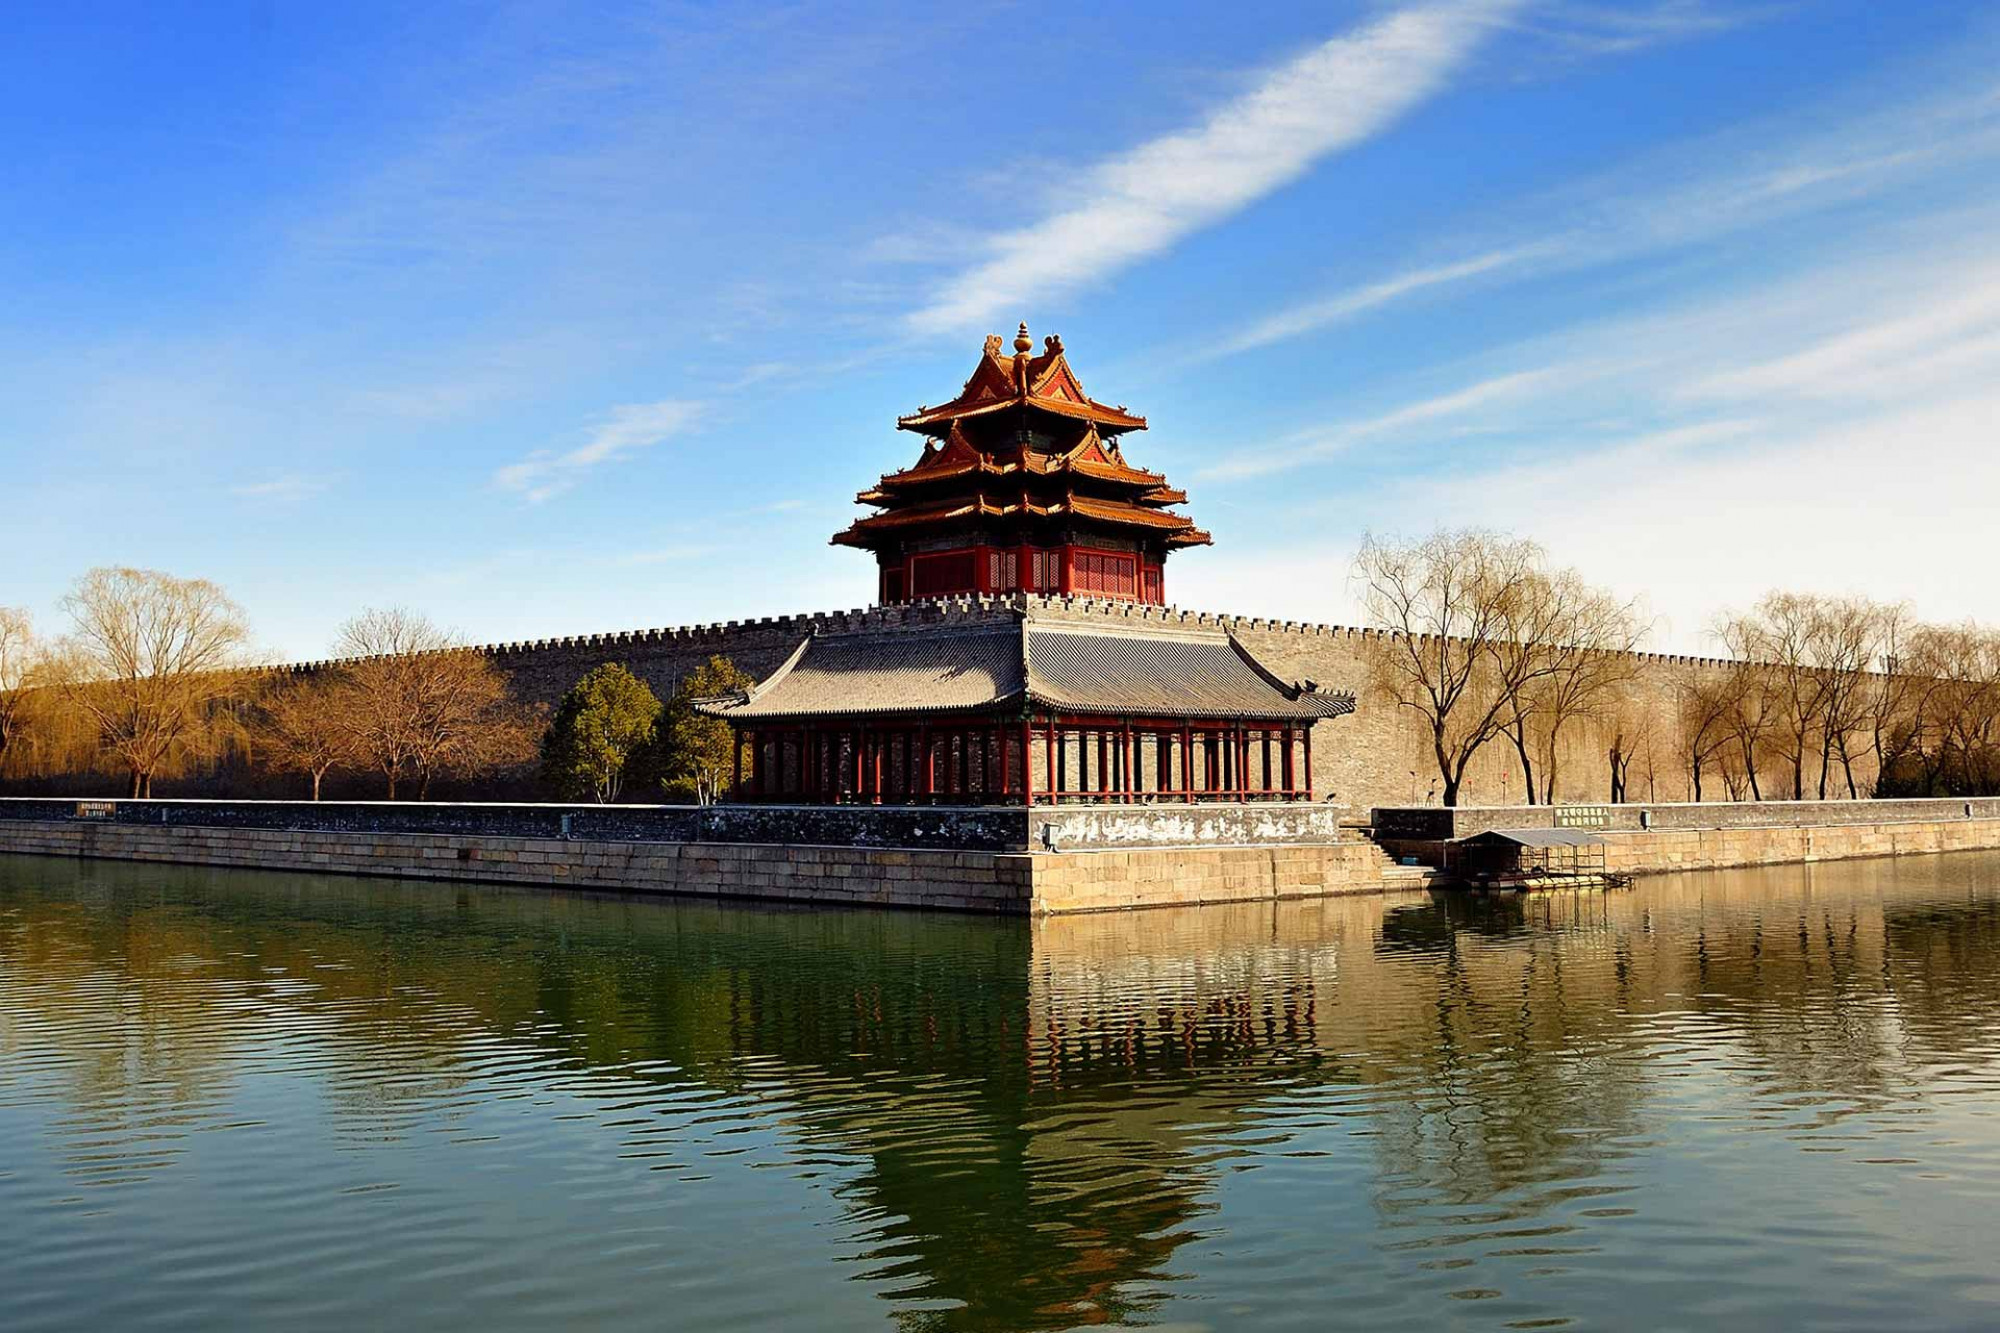 The National Palace Museum, Beijing